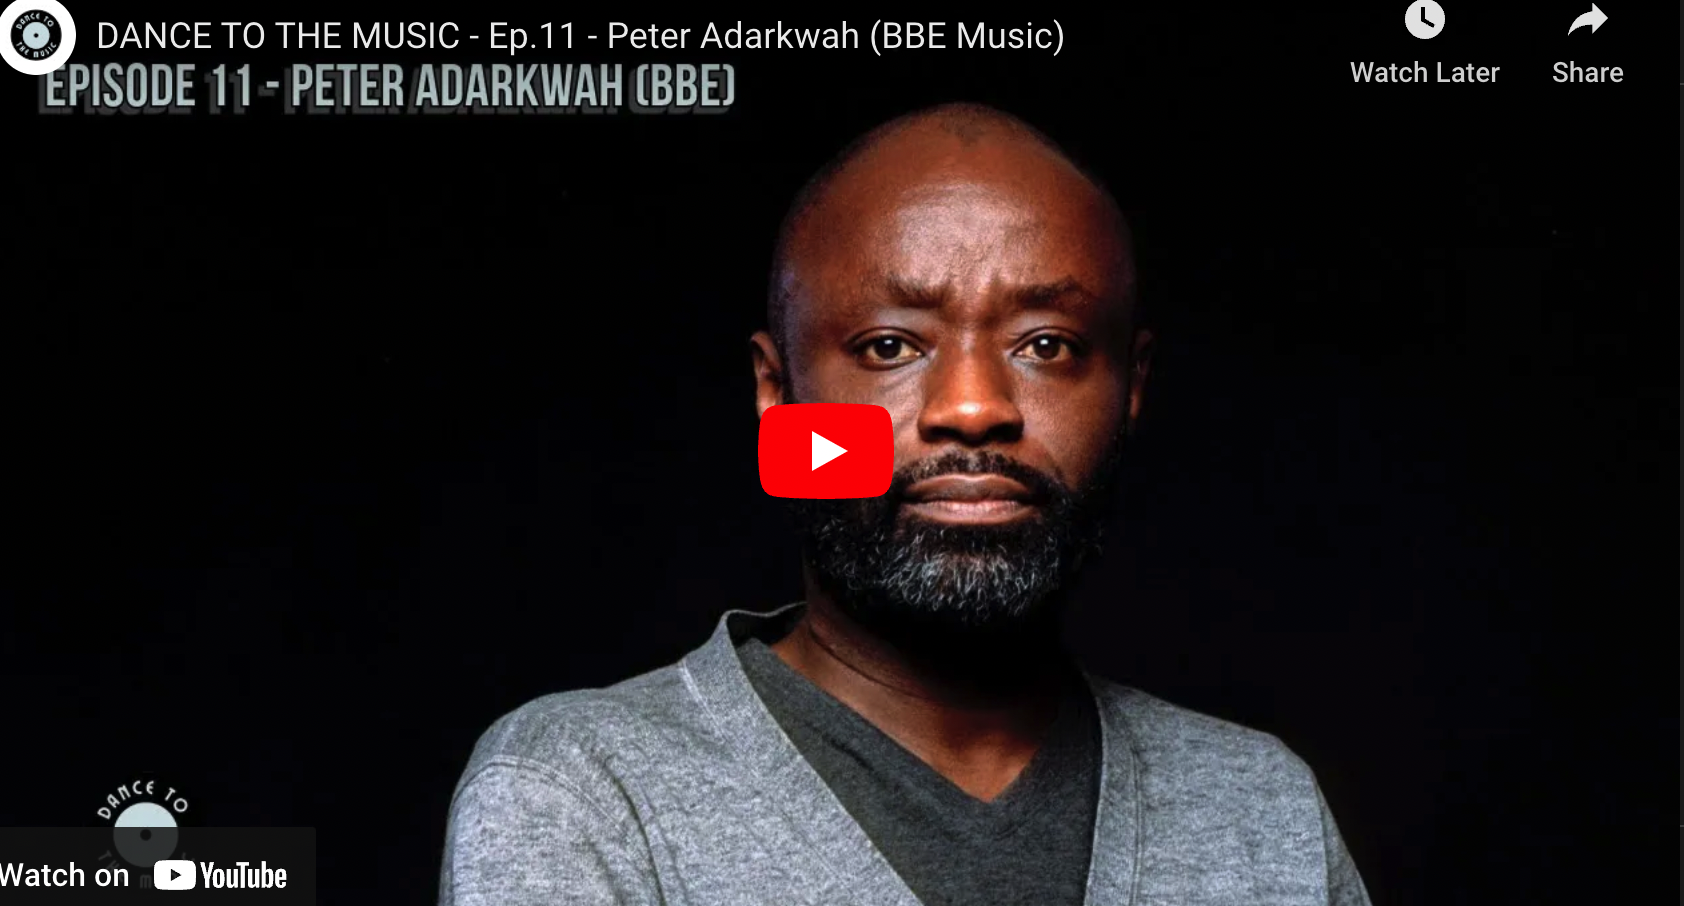 DANCE TO THE MUSIC - Ep.11 - Peter Adarkwah (BBE Music)